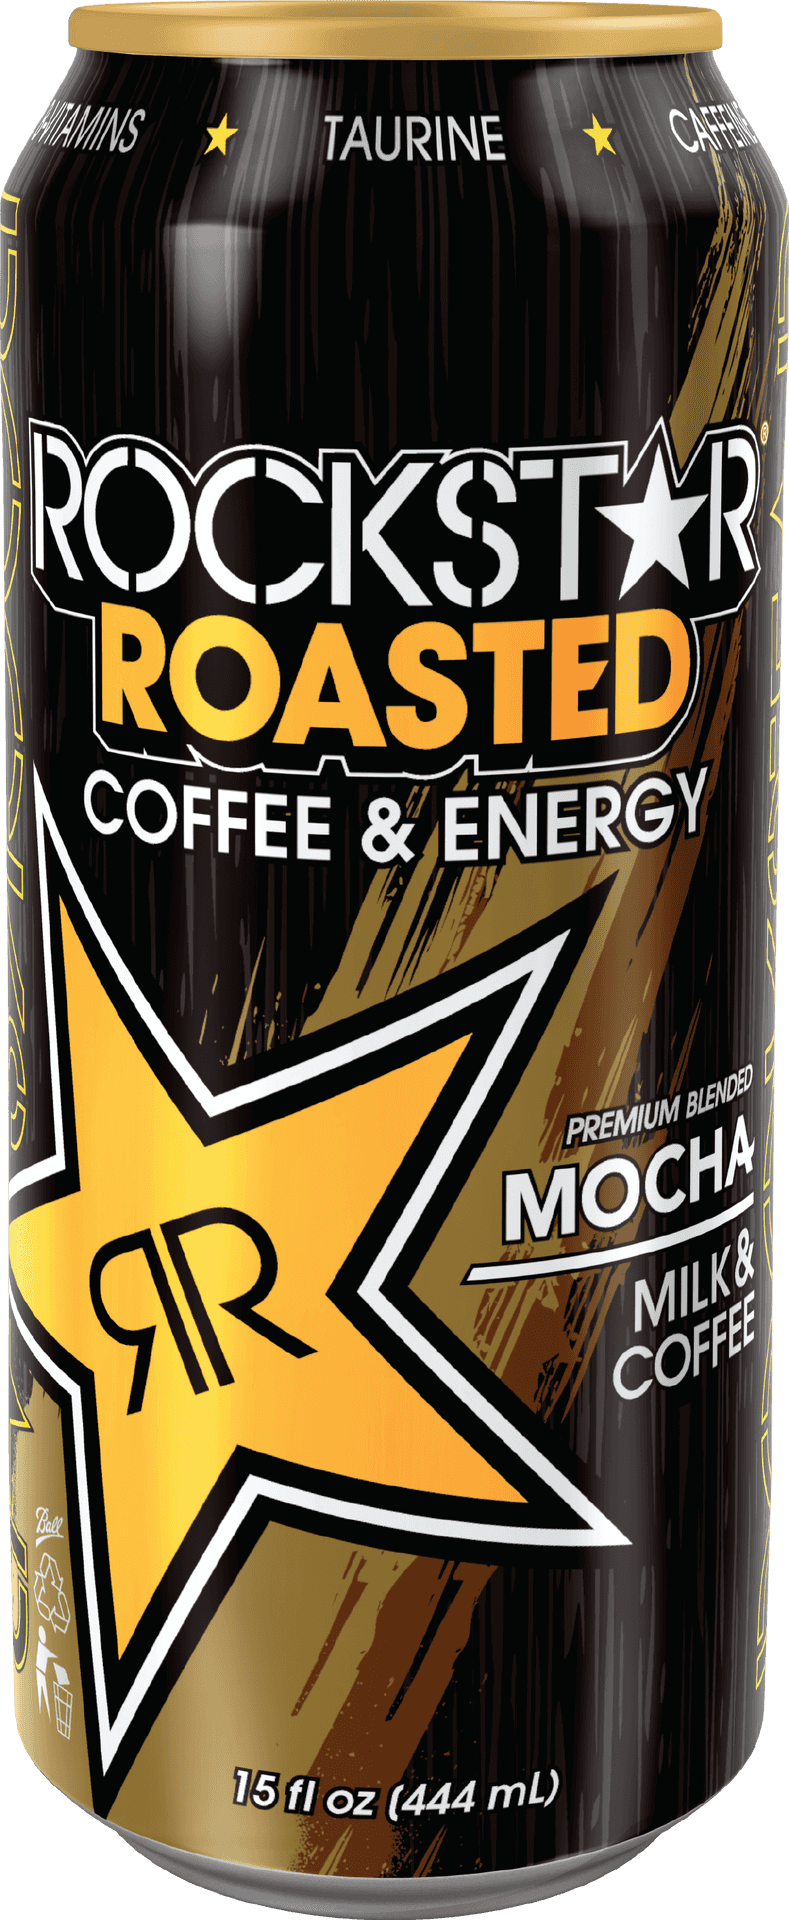 Rockstar Roasted Coffee Energy Drink Can PNG